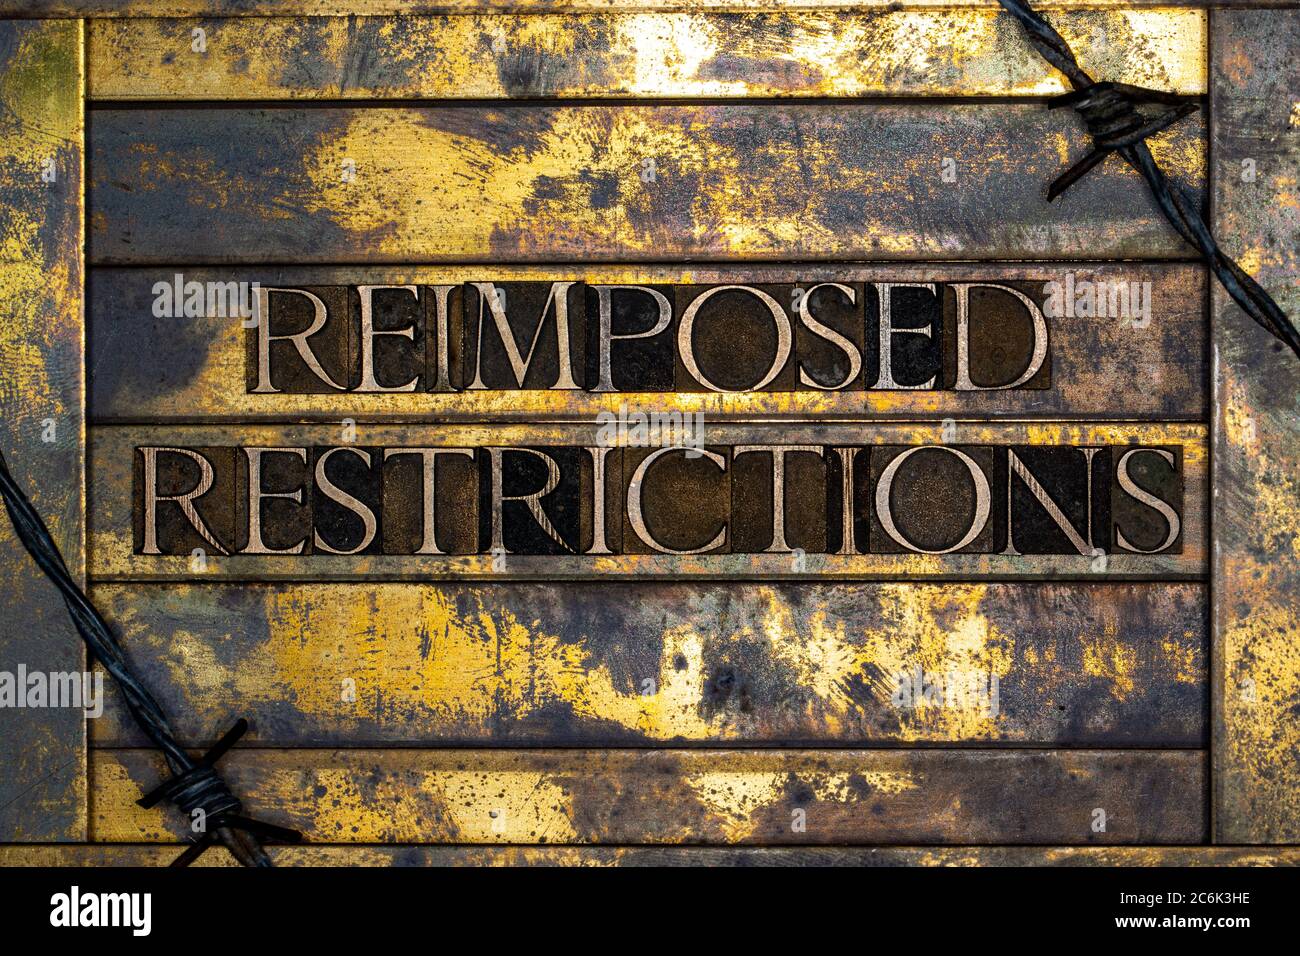 Reimposed Restrictions text formed with real authentic typeset letters on vintage textured silver grunge copper and gold background Stock Photo